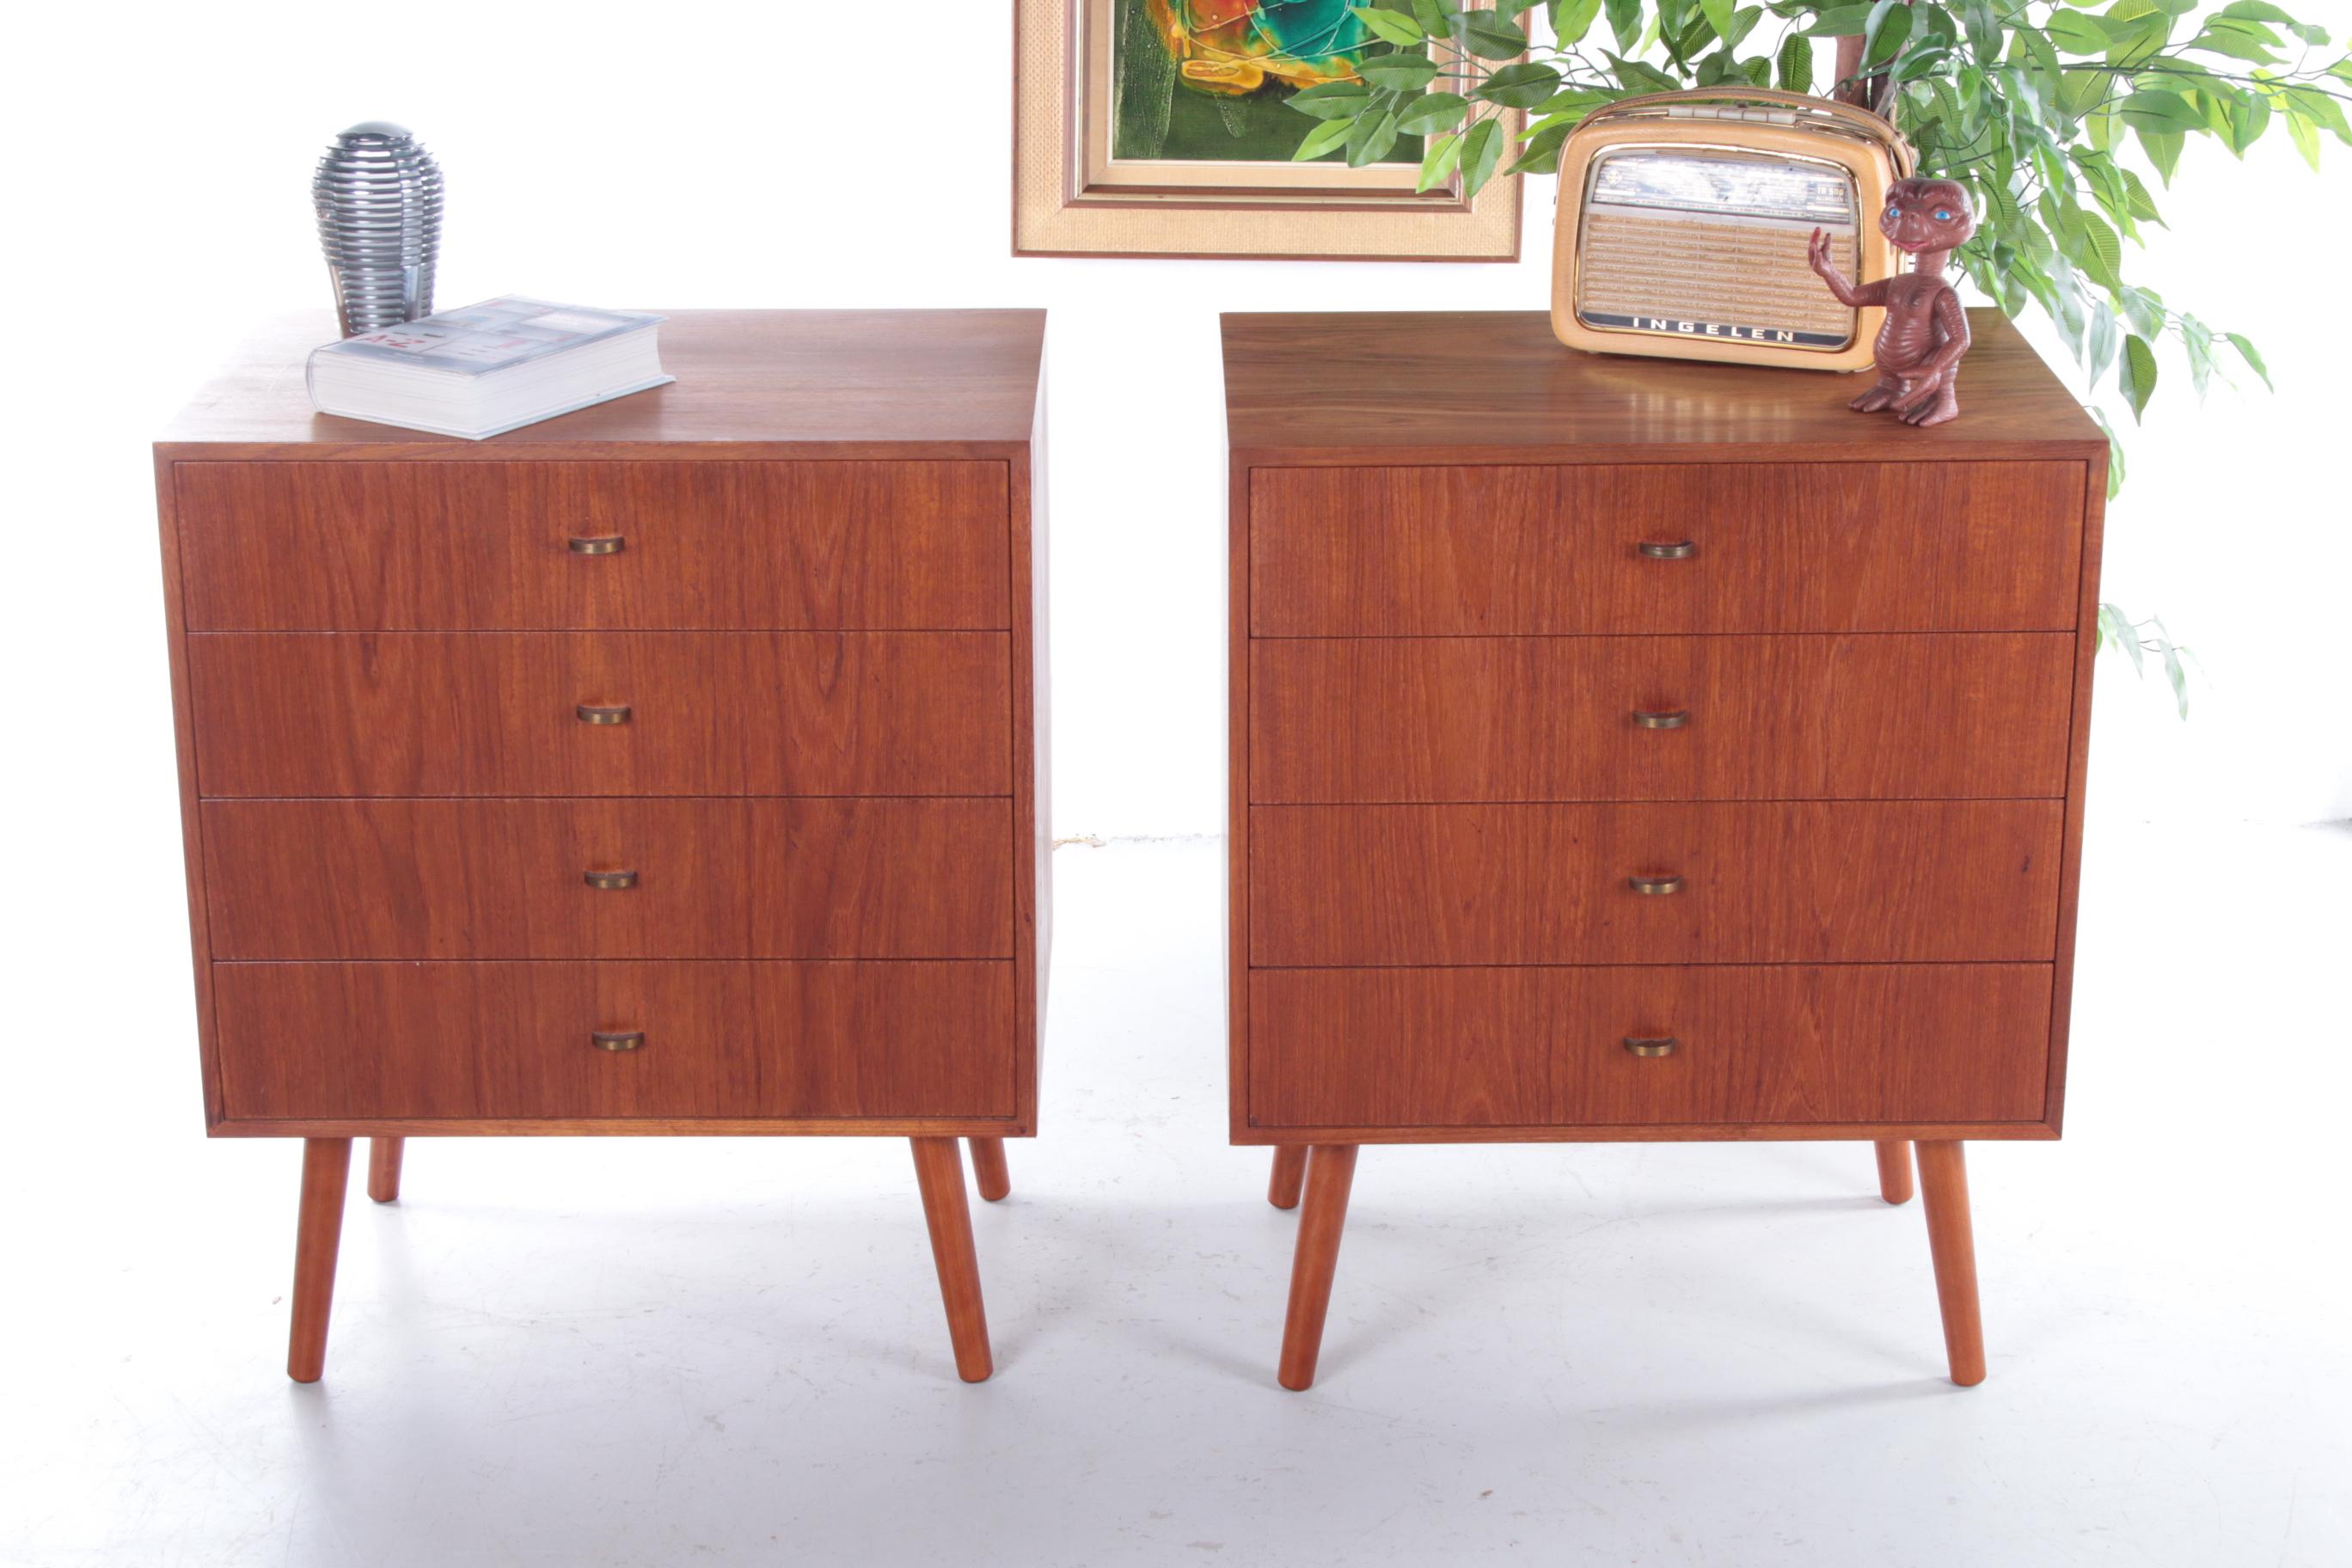 Danish design vintage teak chests of drawers, 1960s

This is a nice set of chests of drawers that can also be used as a sideboard.

There are 4 drawers in each cabinet with a beautiful brass crescent knob.

The cabinets have beautiful elegant